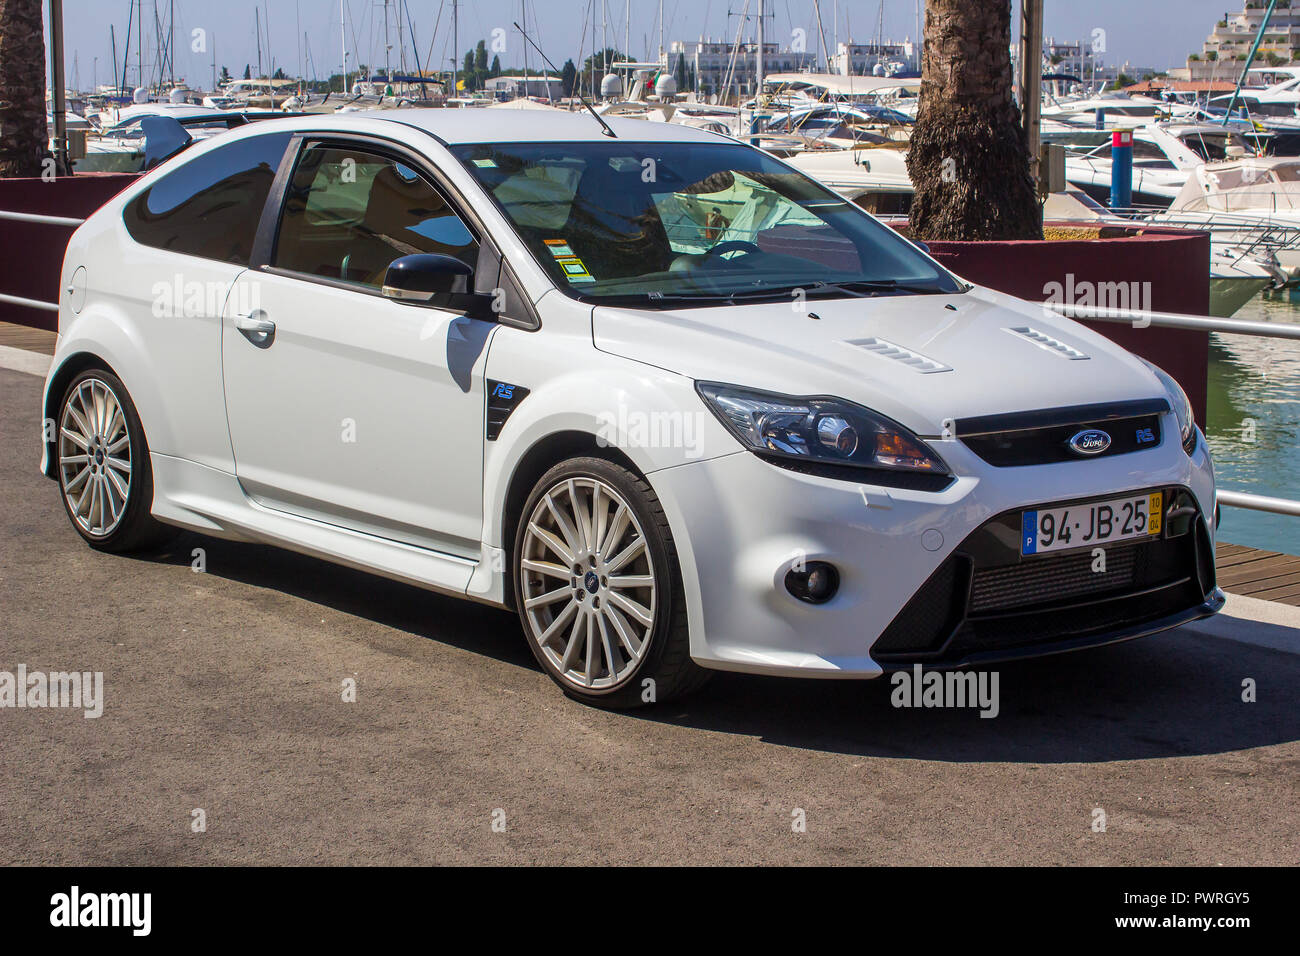 2 October 2018 A sleek white Ford Focus RS car on the Quay of The luxurious Marinai n Vilamoura Portugal on The Algarve Stock Photo